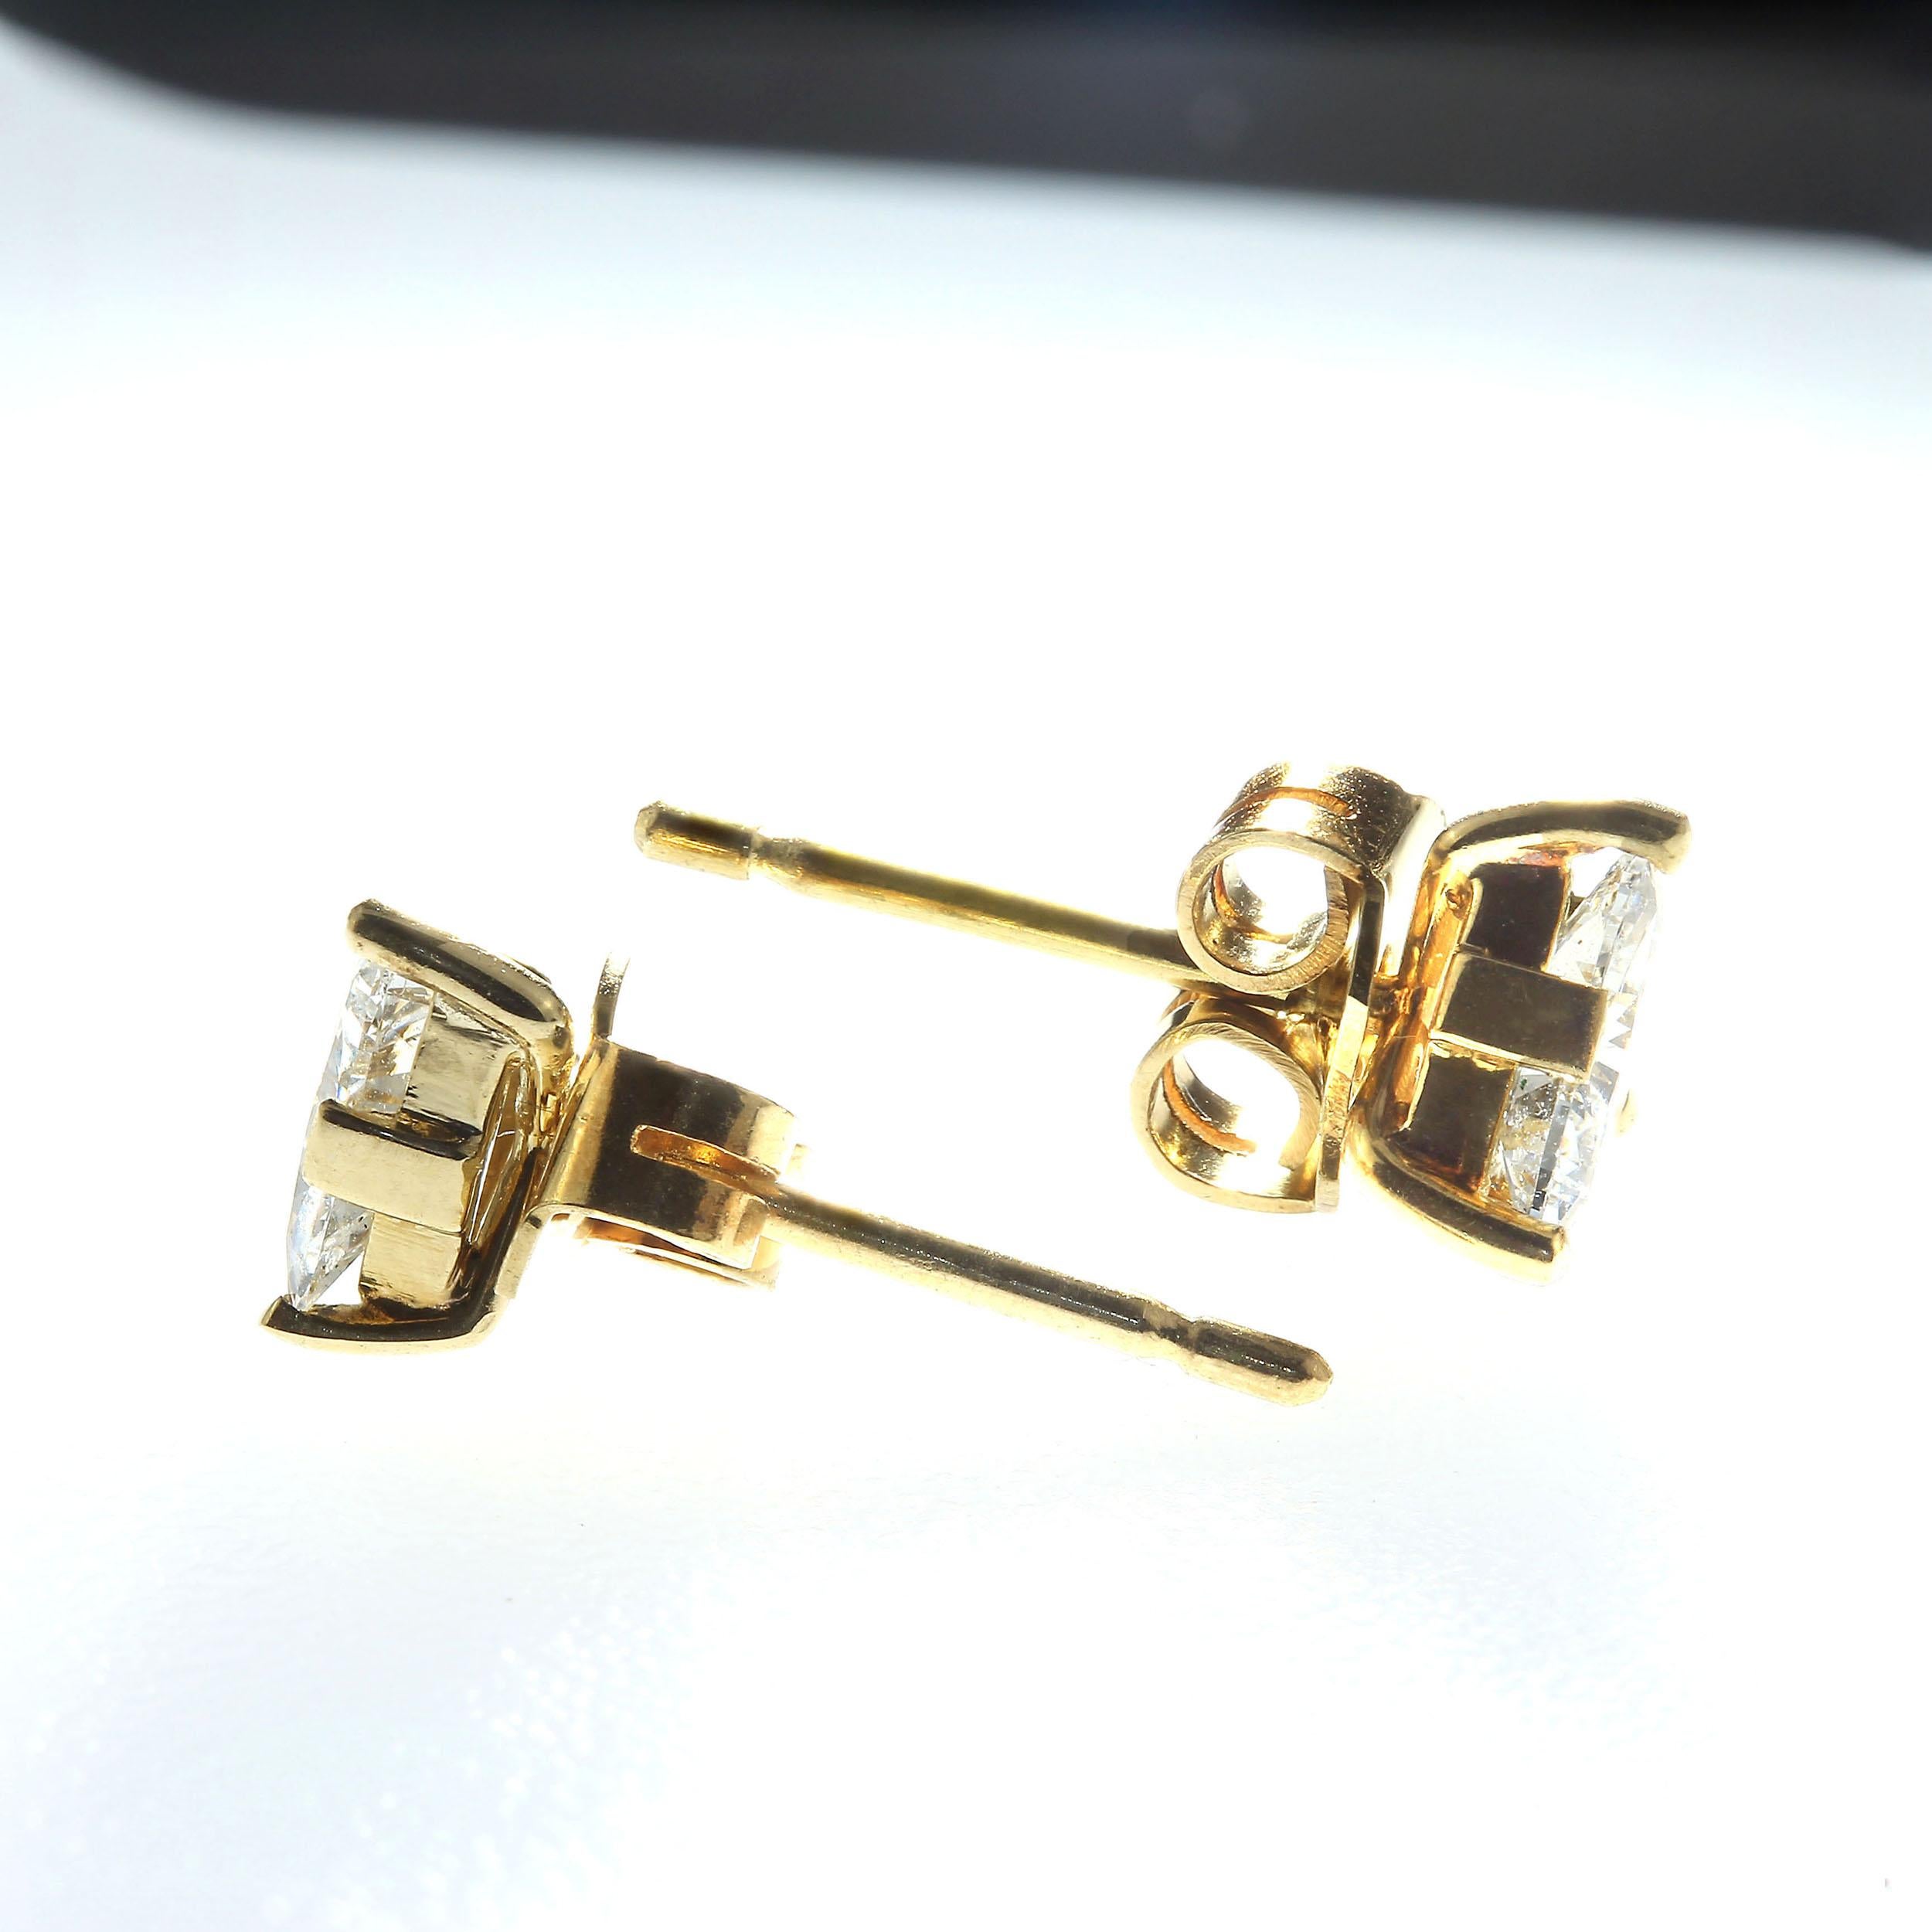  AJD 1.25 Carat Glittering Diamond Stud Earrings  April Birthstone In New Condition For Sale In Raleigh, NC